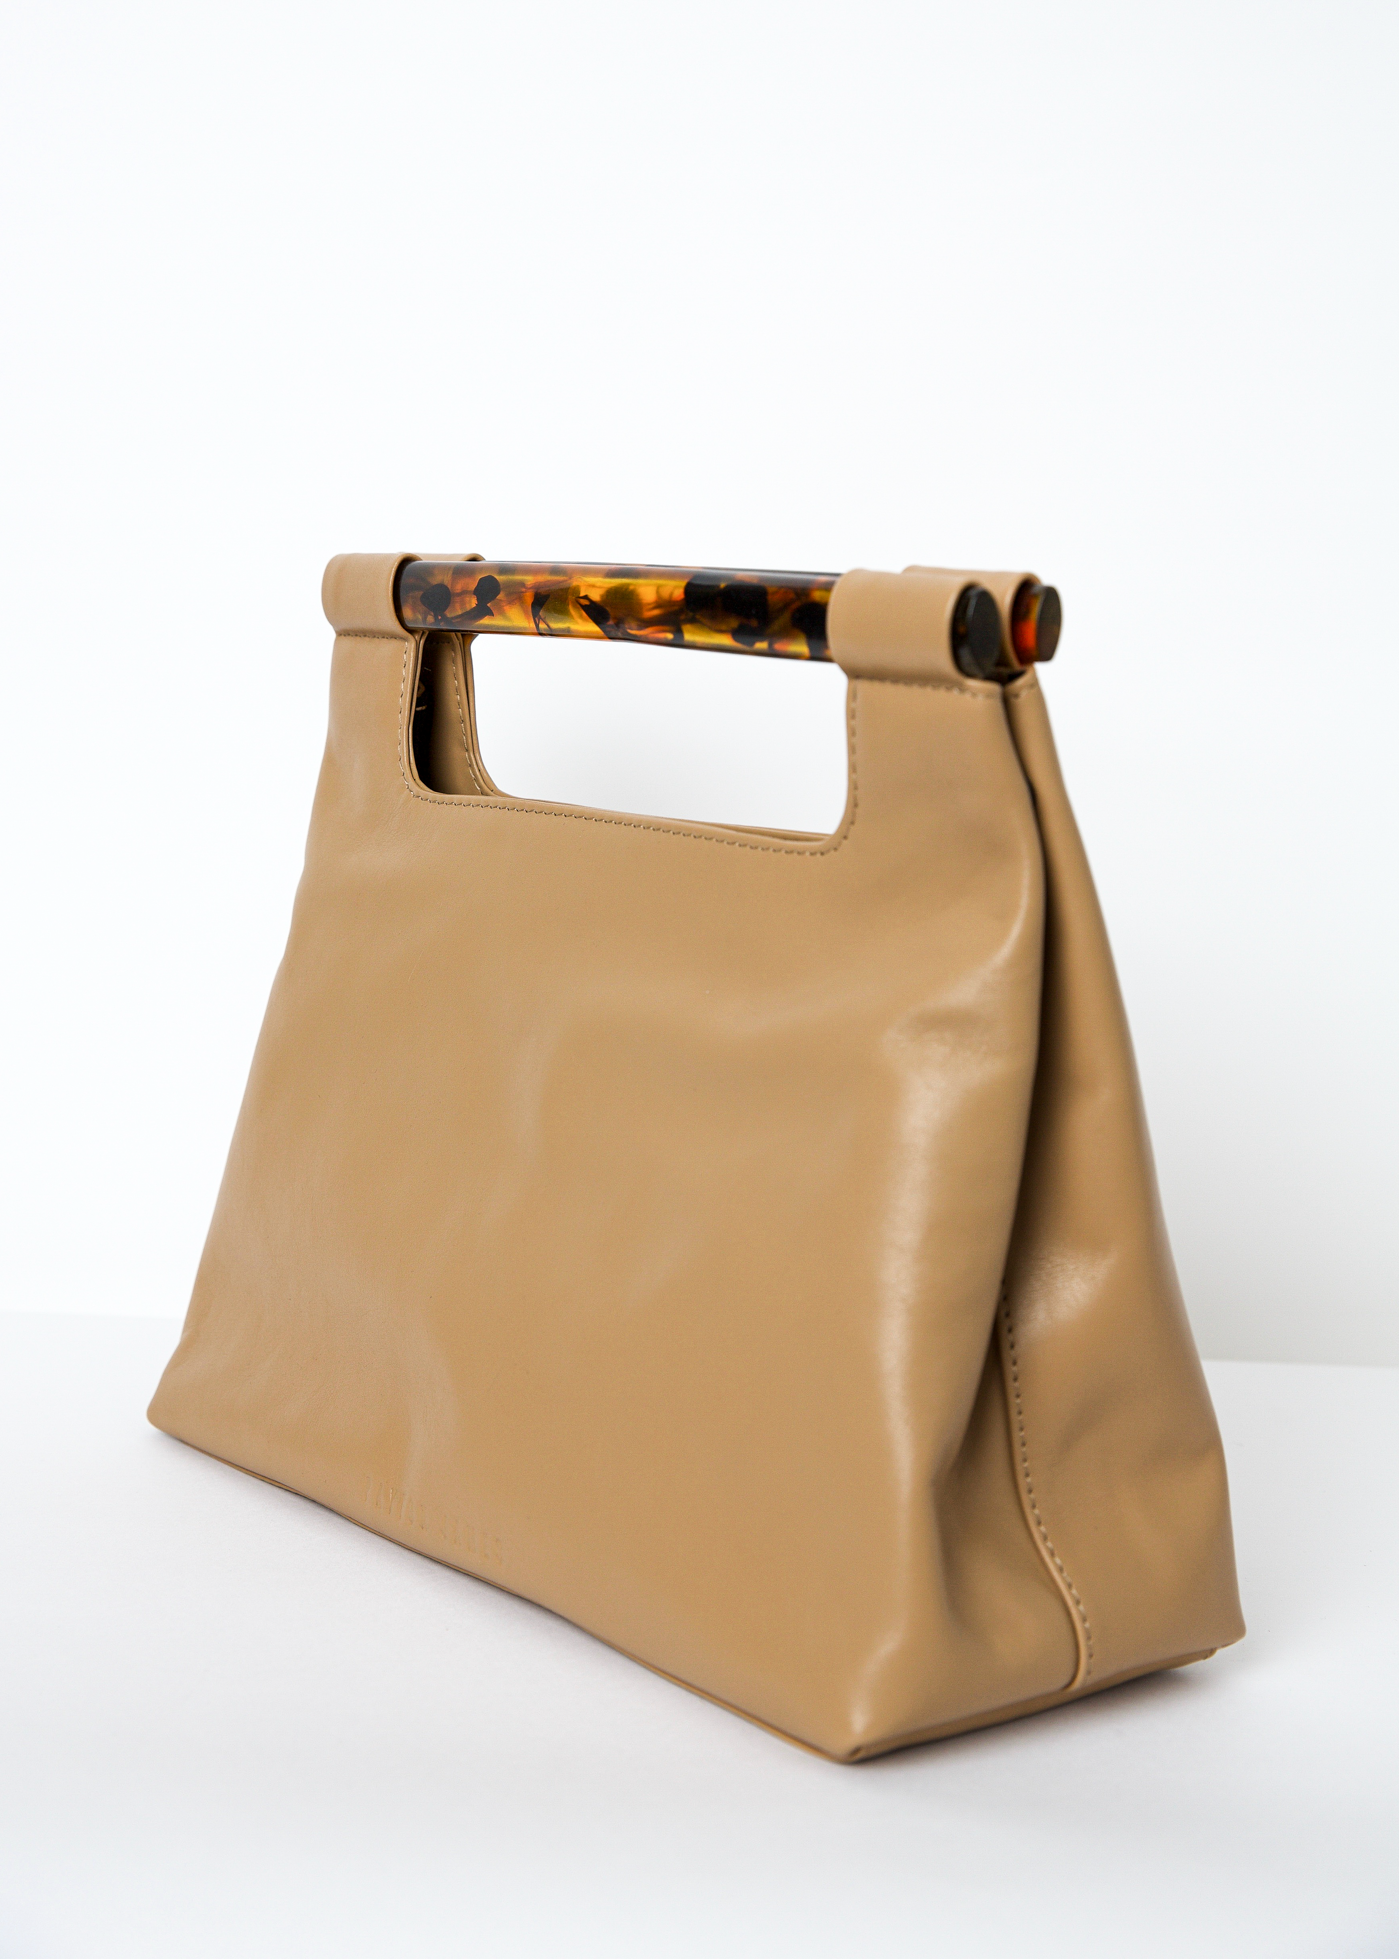 The Eloise Tote in Cappuccino